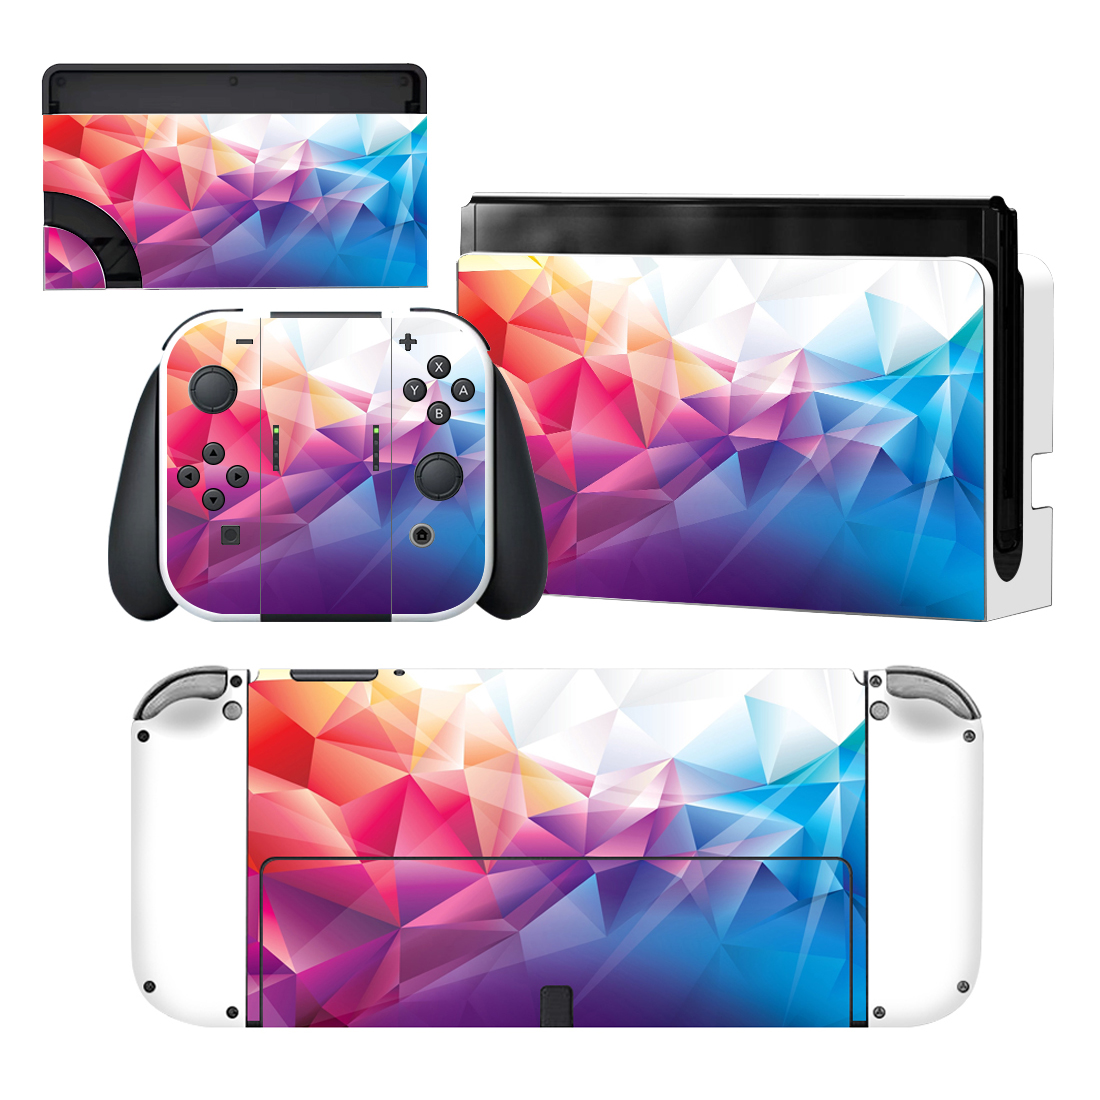 Abstract Polygonal Pattern Nintendo Switch OLED Skin Sticker Decal